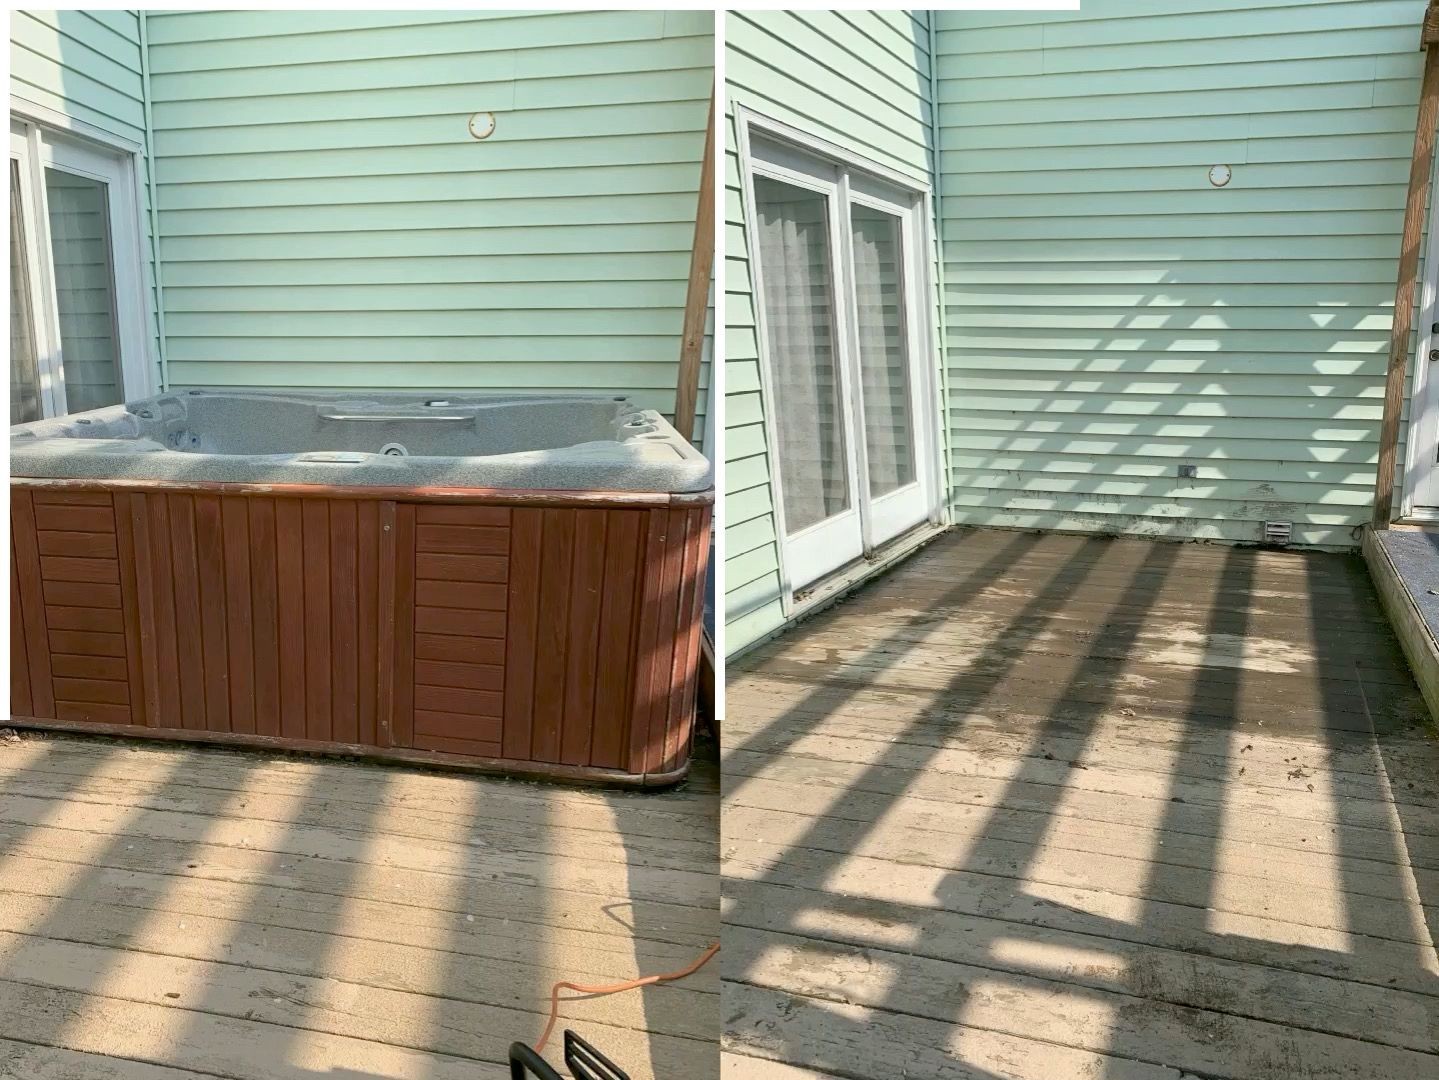 junk removal, hot tub removal before and after